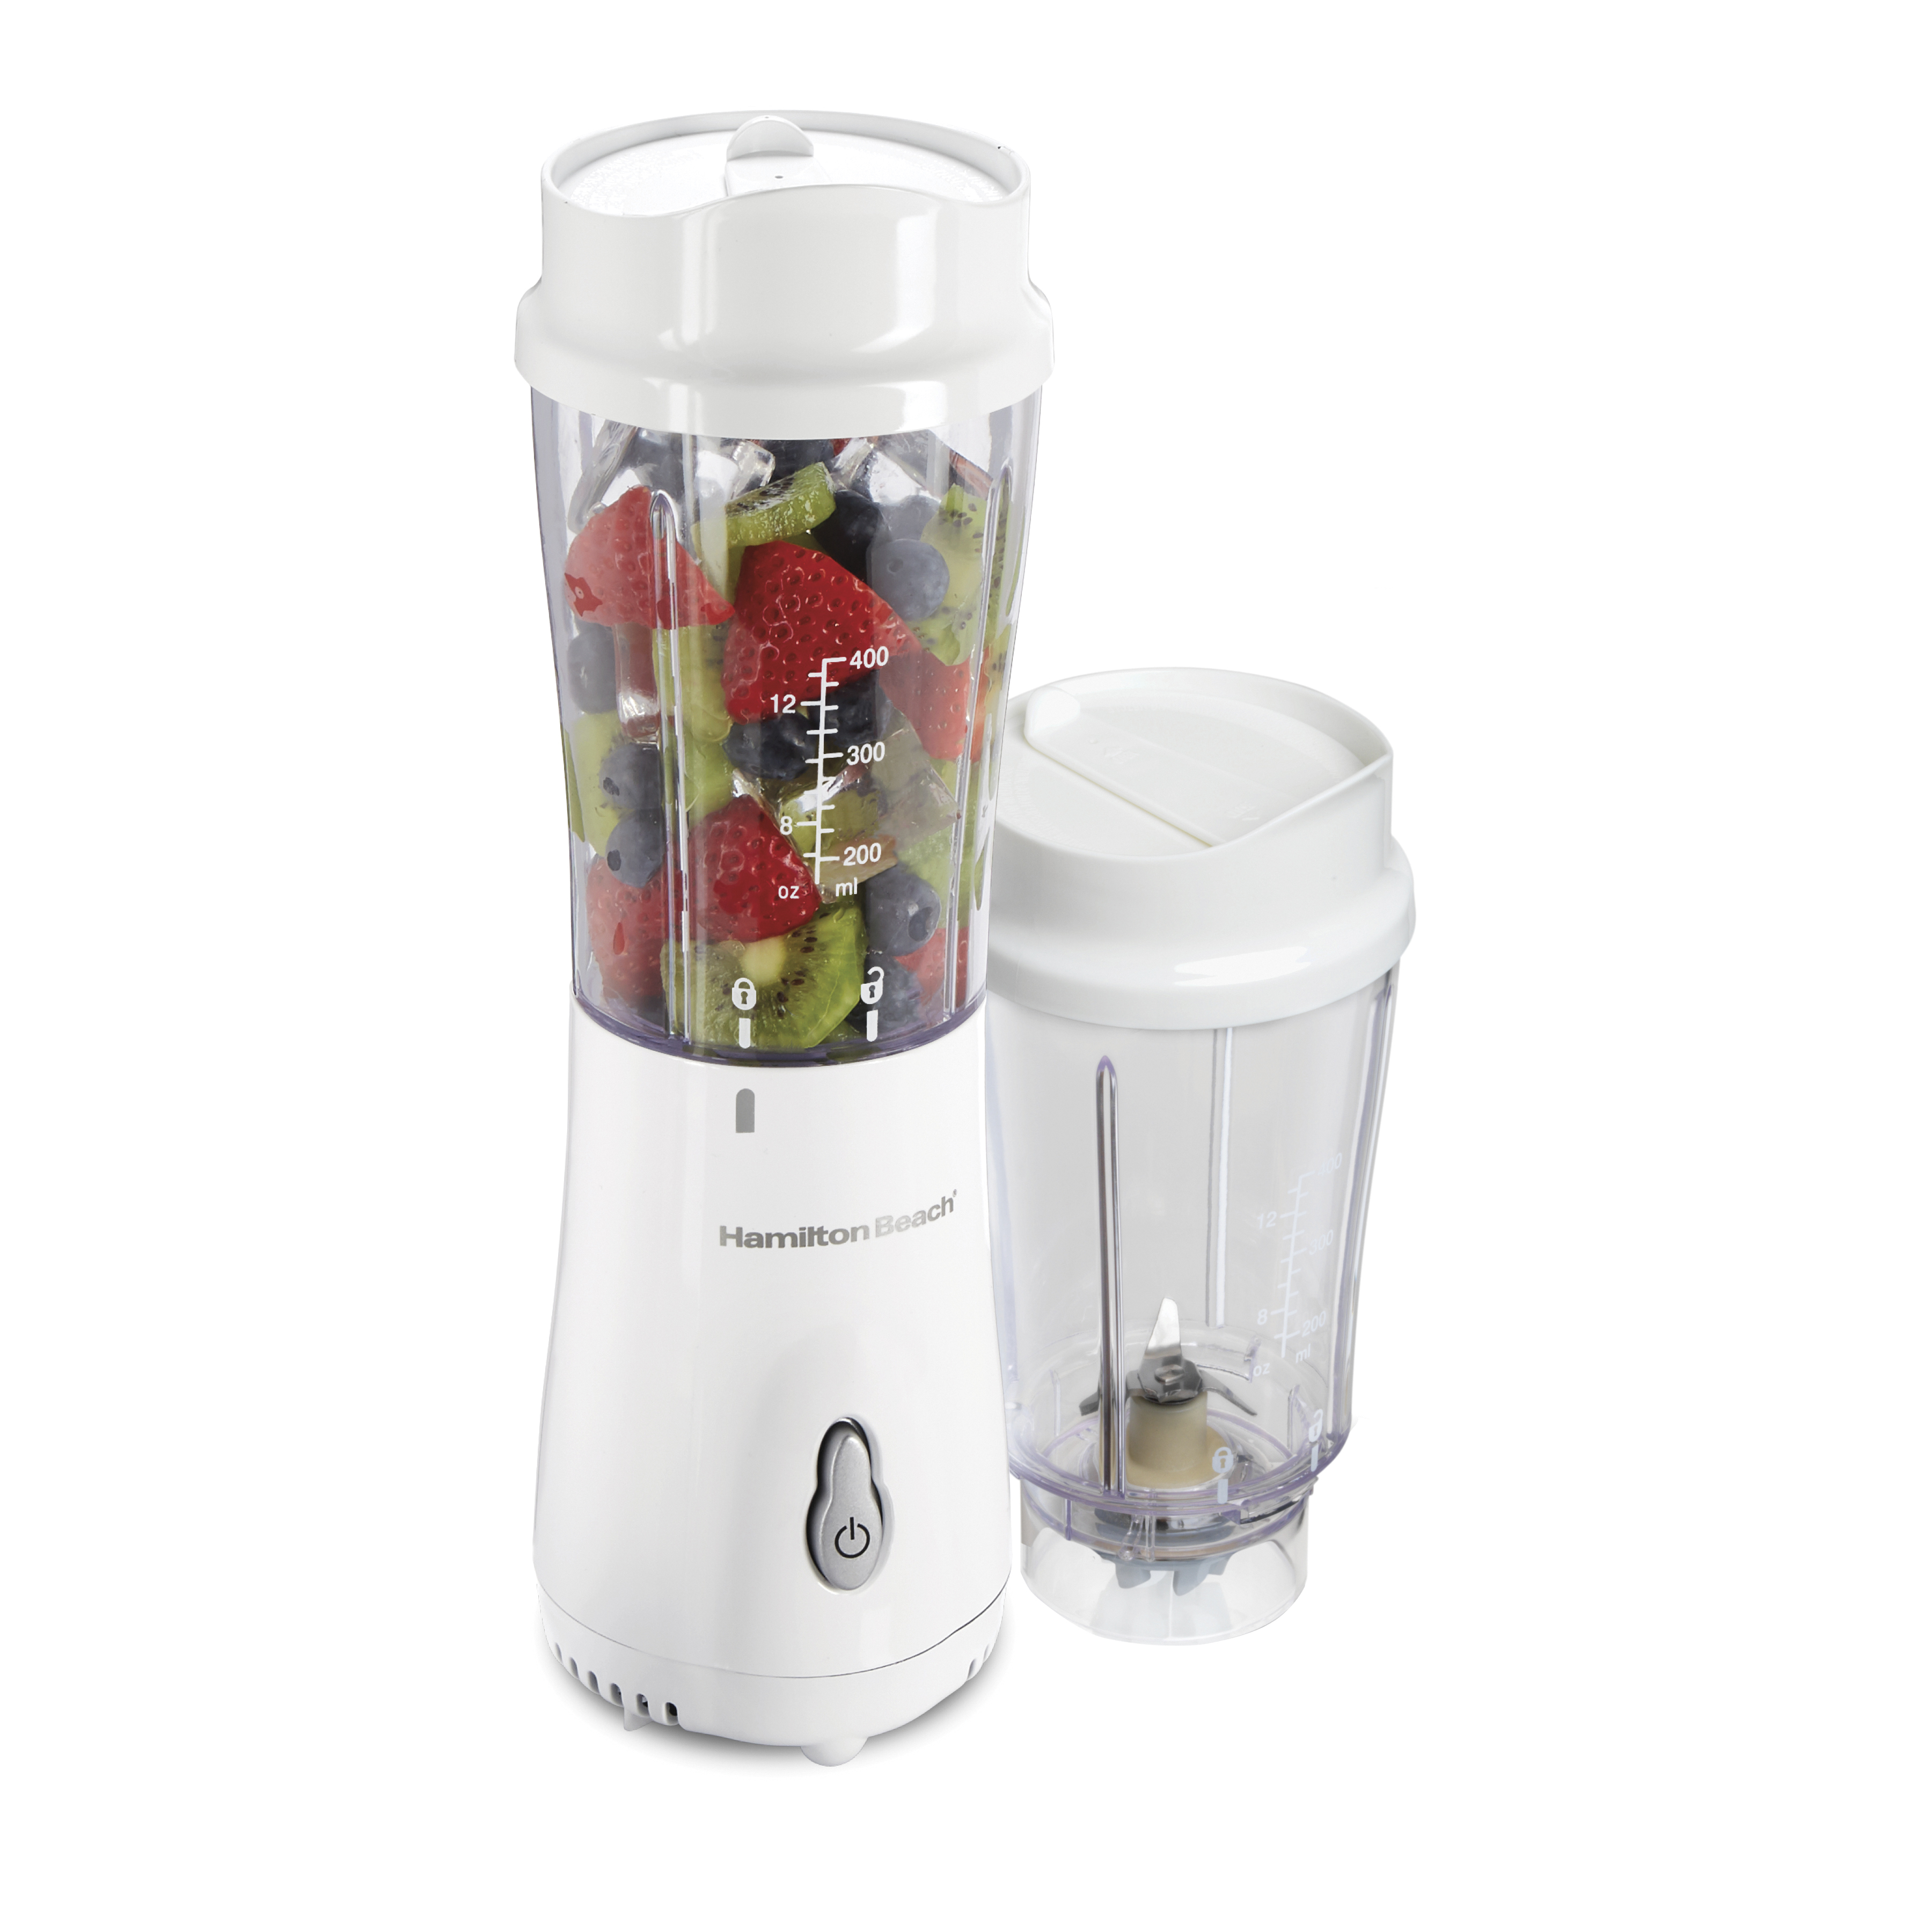 Hamilton Beach Smoothie Blender with 2 Travel Jars and 2 Lids, White 51102V - image 1 of 8